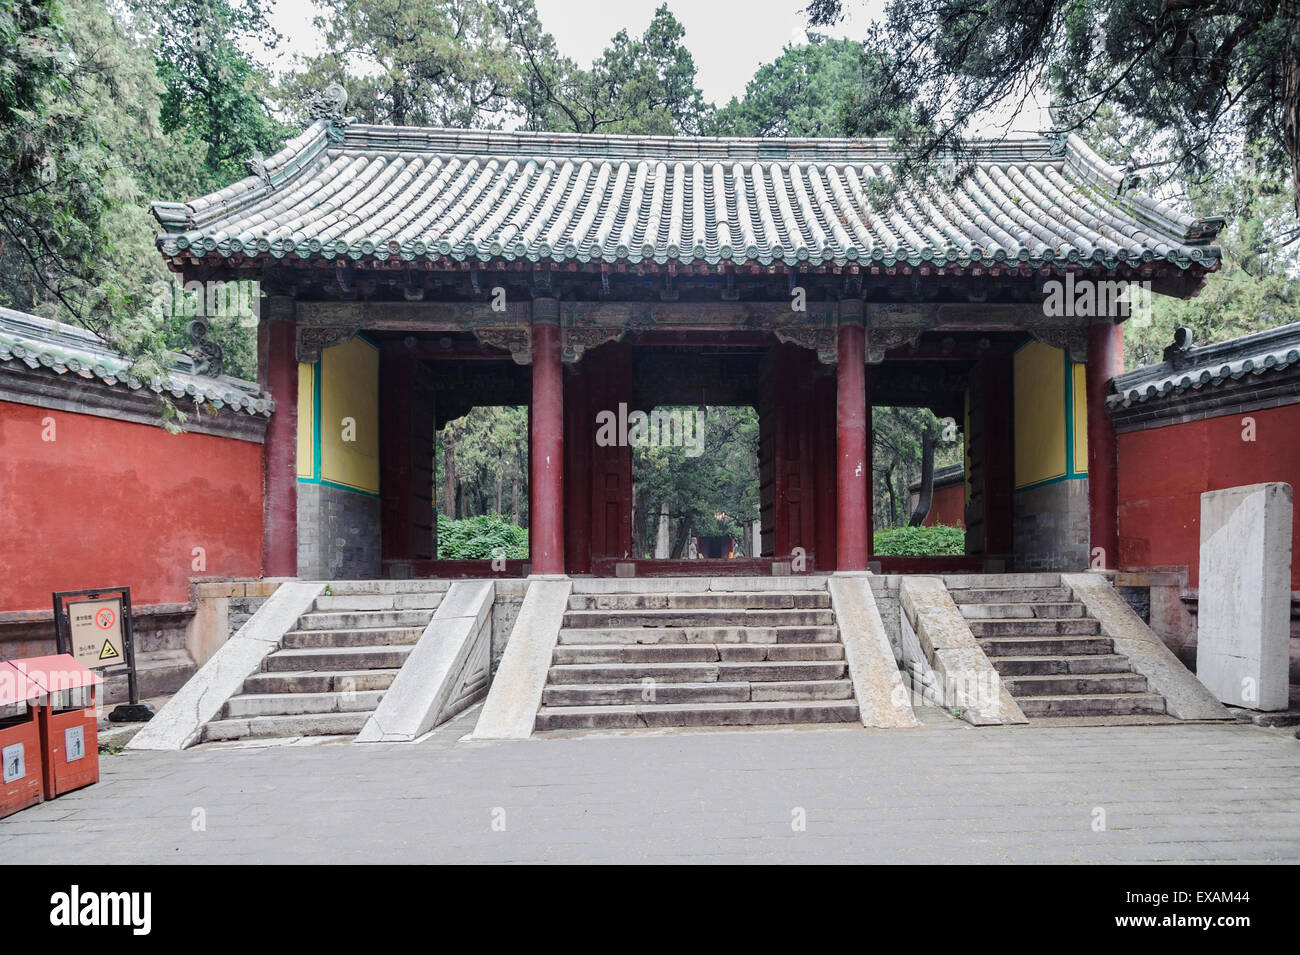 Entrance gate to the burial site of Confucius, the great philosopher of ancient China, in Qufu, Shandong Province. Stock Photo